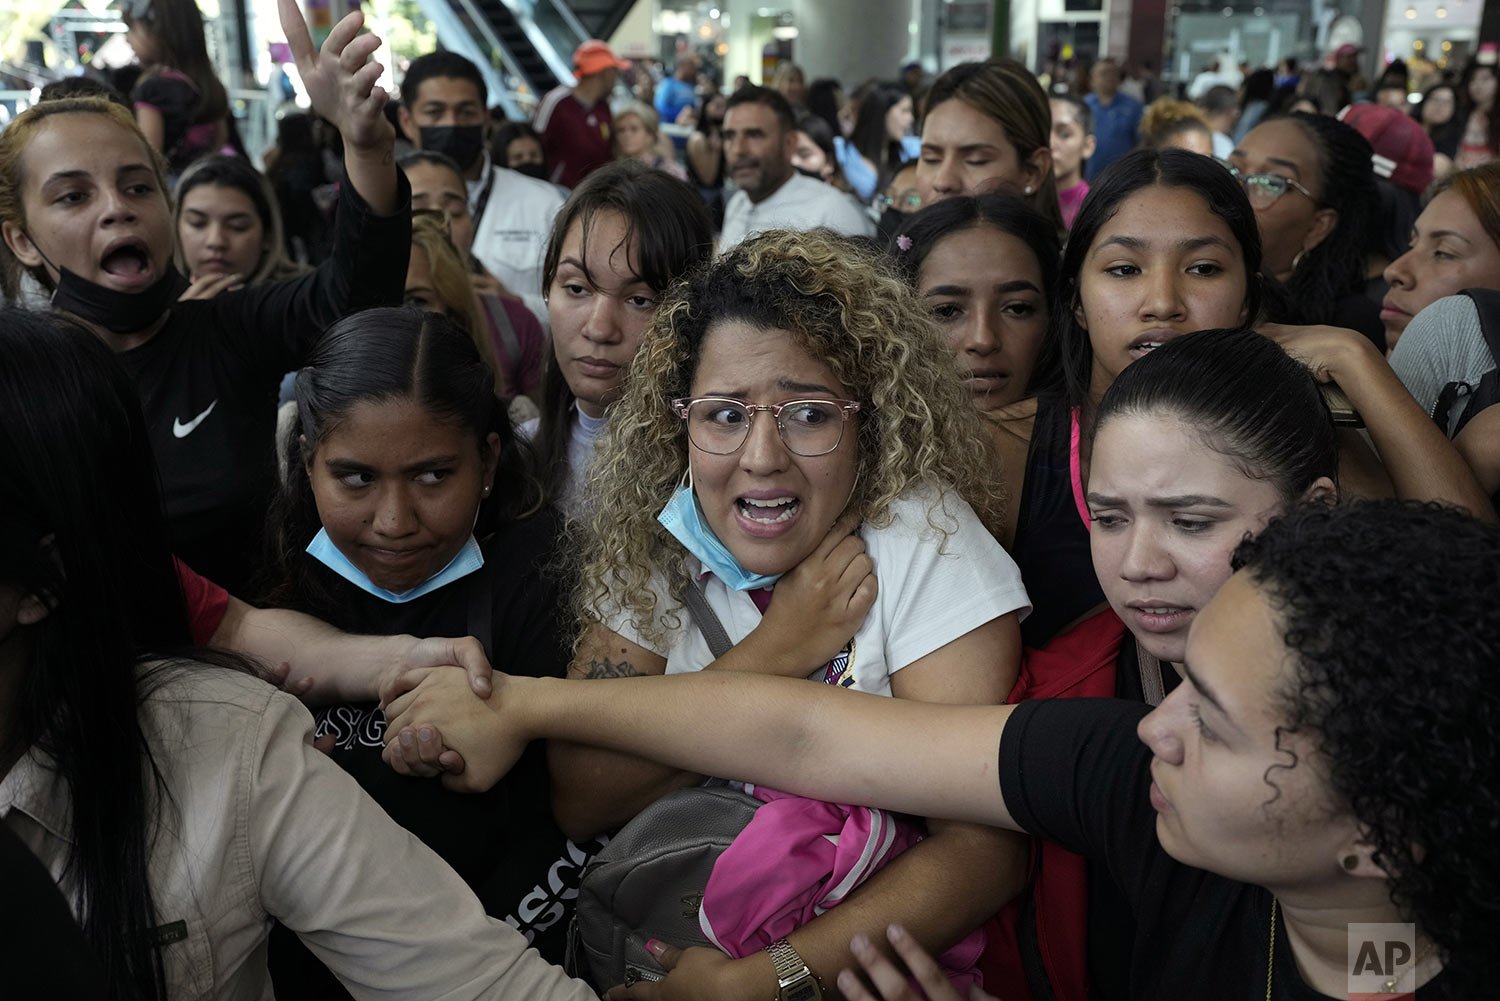  Employees force Black Friday shoppers to create an orderly line before entering a shoe store, in groups of 10 for a limited time of 10 minutes, at the Sambil Mall in Caracas, Venezuela, Friday, Nov. 26, 2022. (AP Photo/Ariana Cubillos) 